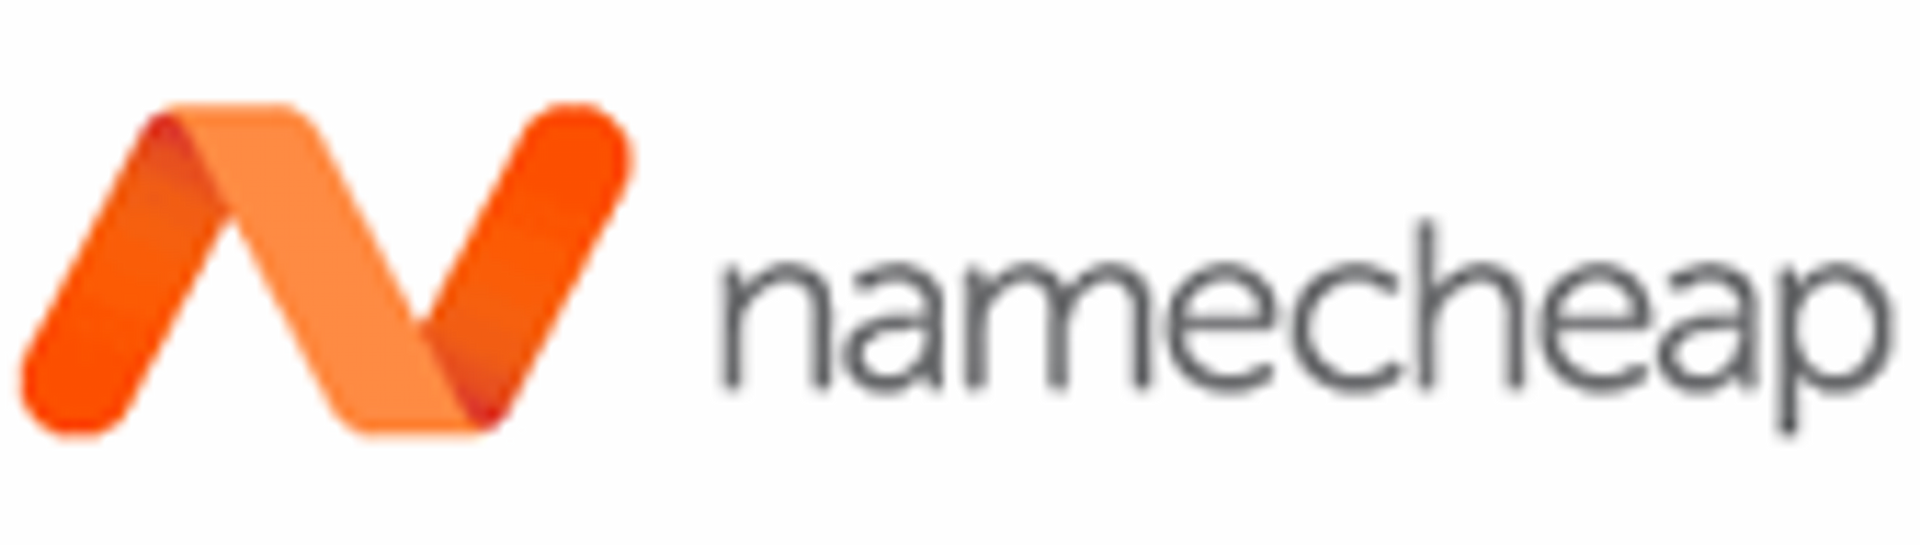 How to Create a CNAME Record For Your Domain - Domains - Namecheap.com